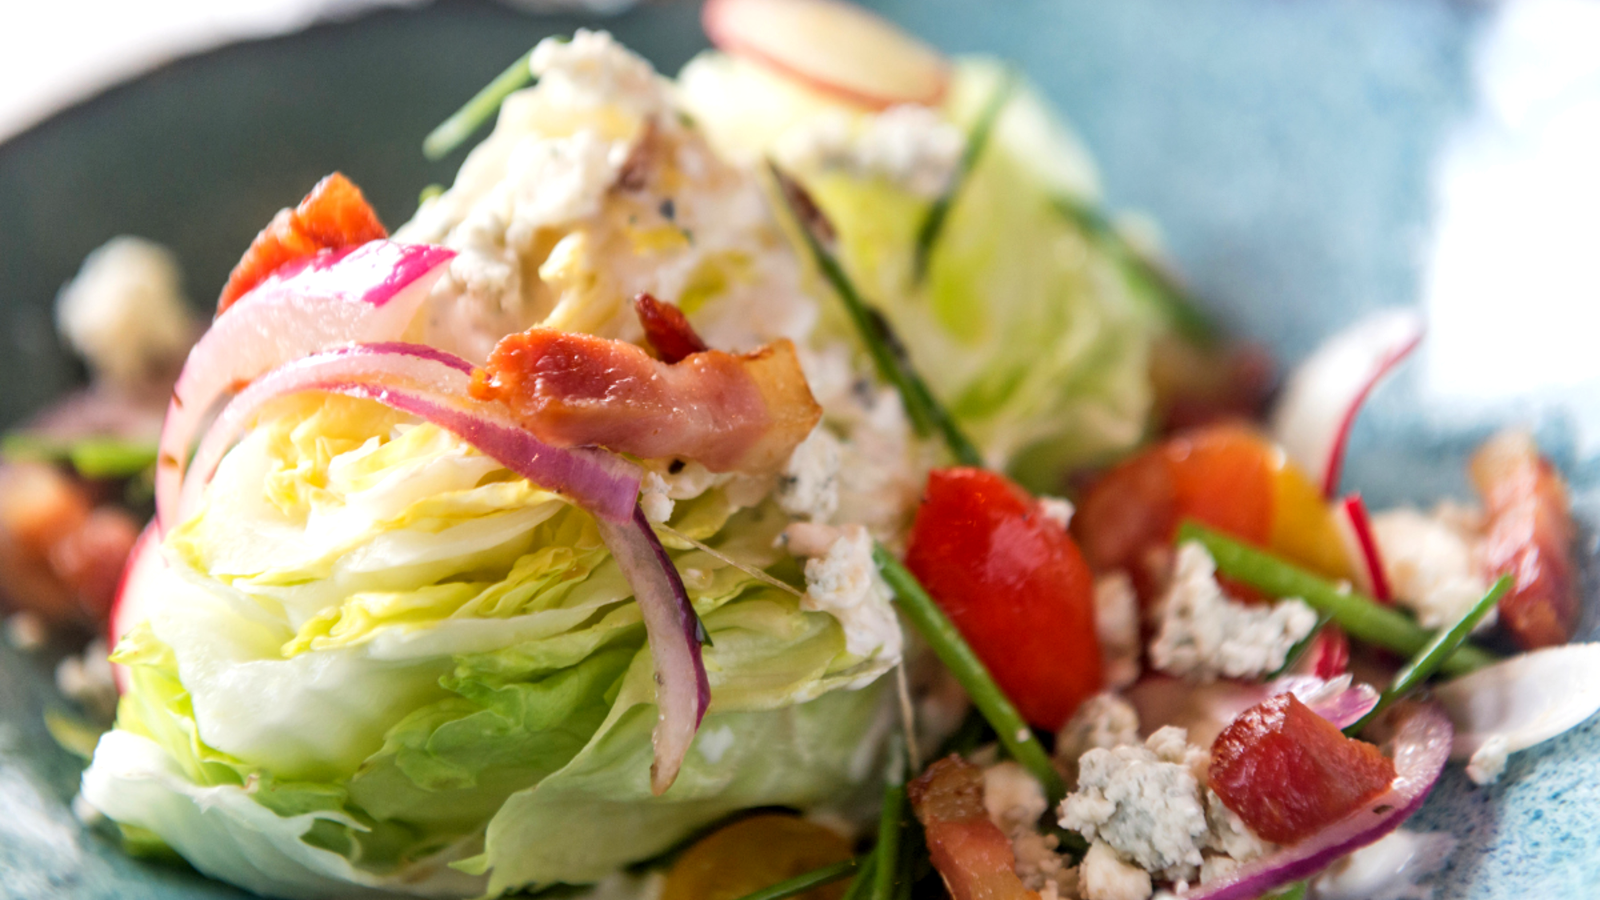 Image of Wedge Salad With Blue-Cheese, Apples & Toasted Almonds